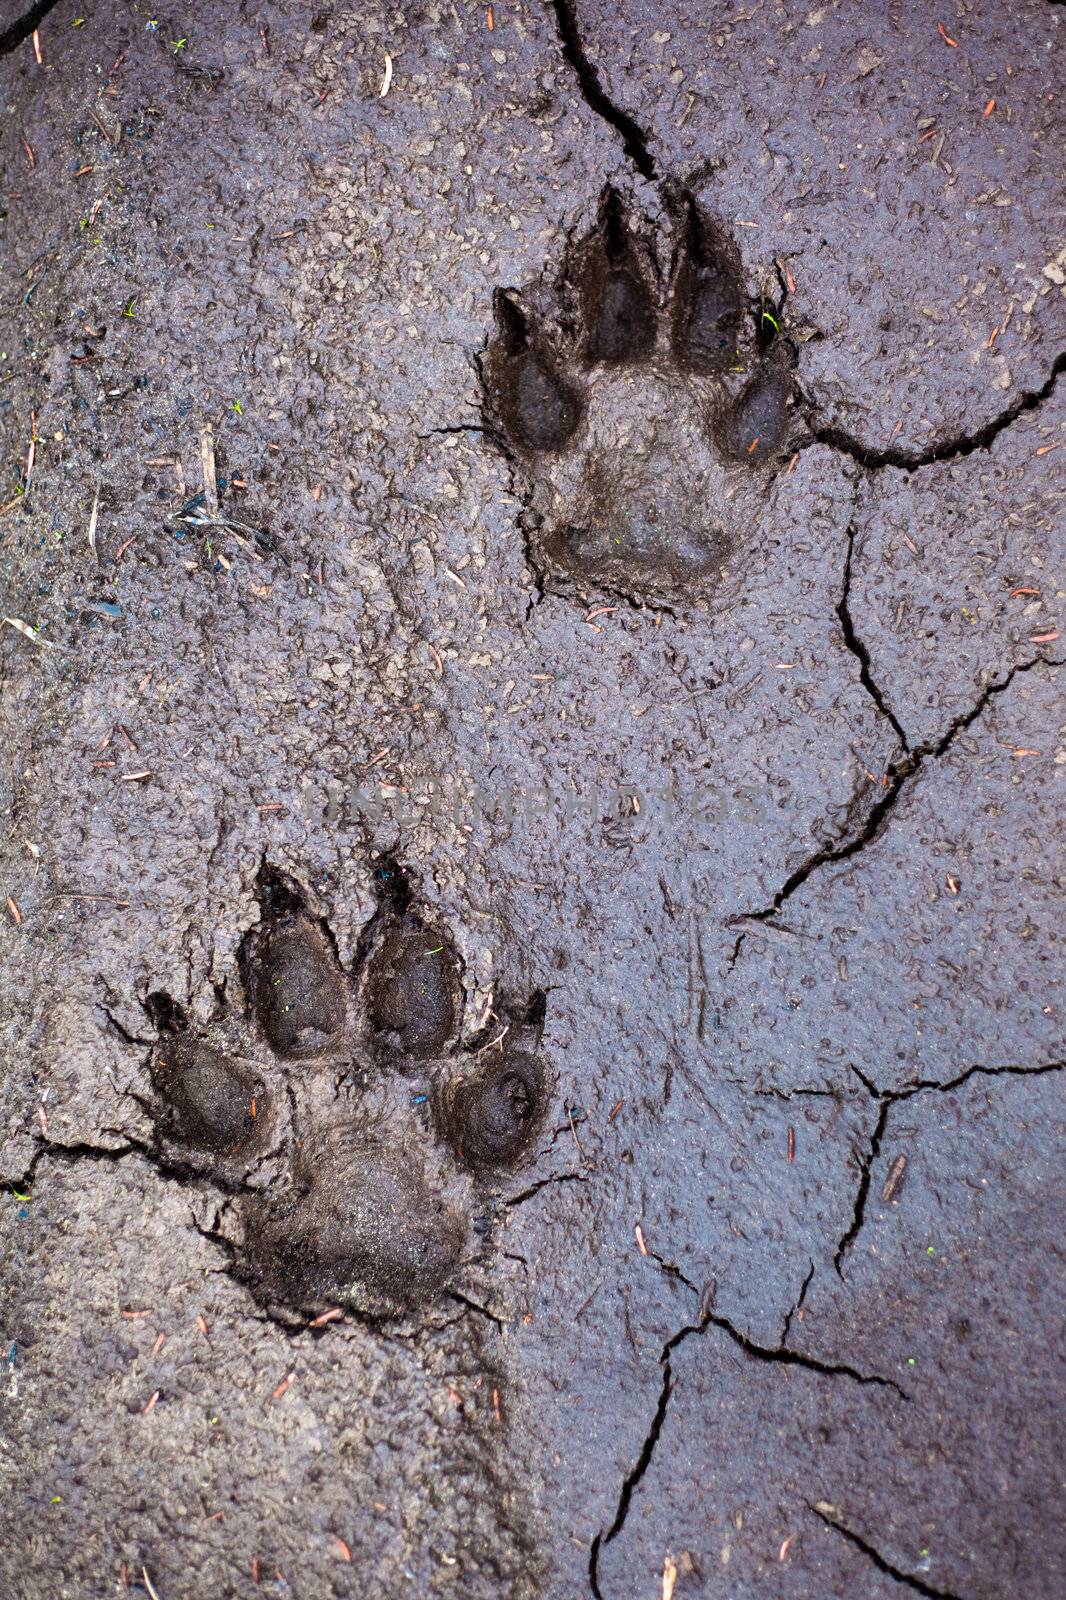 Wolf tracks by PiLens